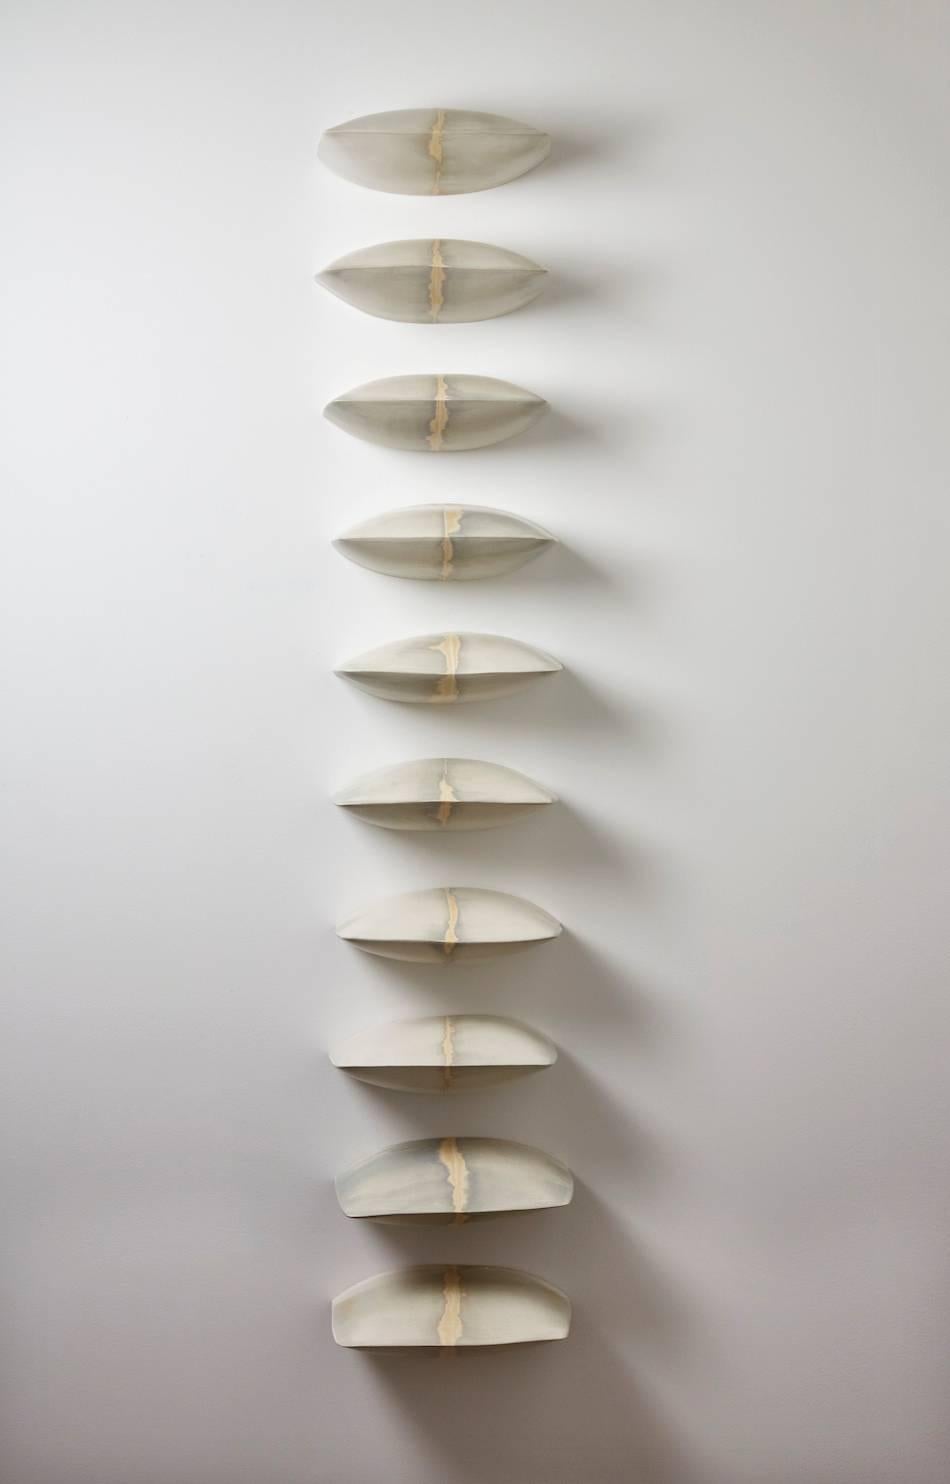 Maren Kloppmann (b. 1962.)
Extra large shadow wall pillow stack, 2015.
Various elements in porcelain.
70